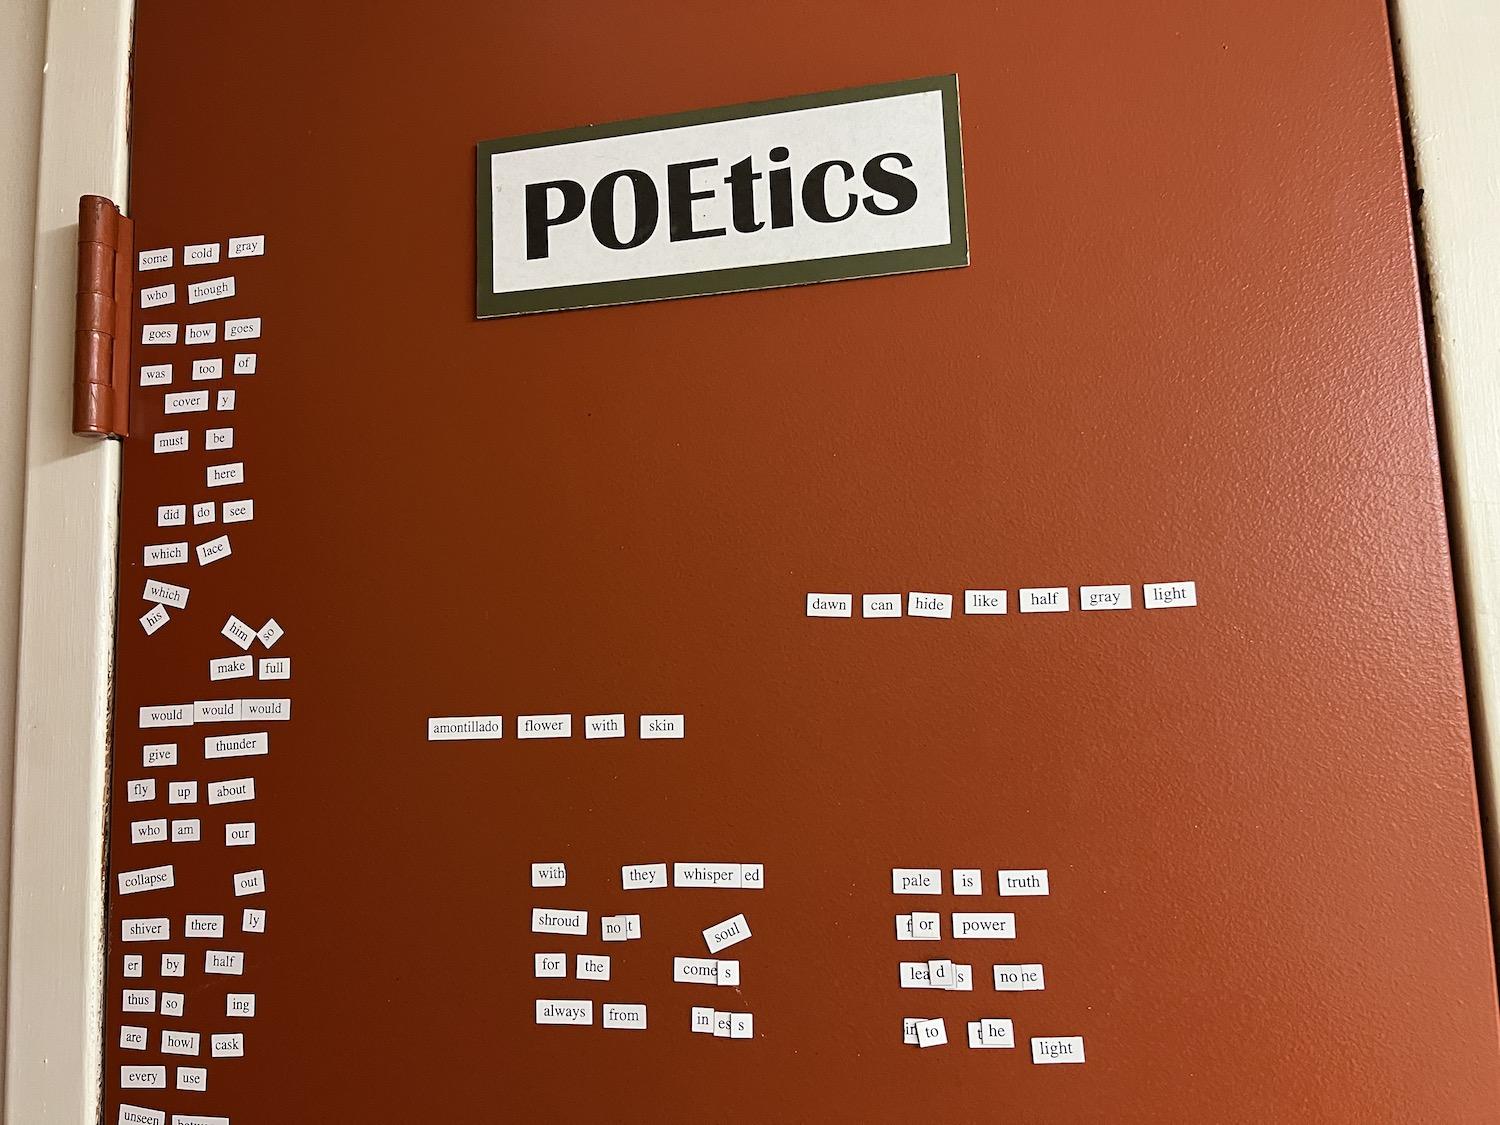 You can buy Edgar Allan Poe-themed magnetic poetry kits at the national historic site in Philadelphia.